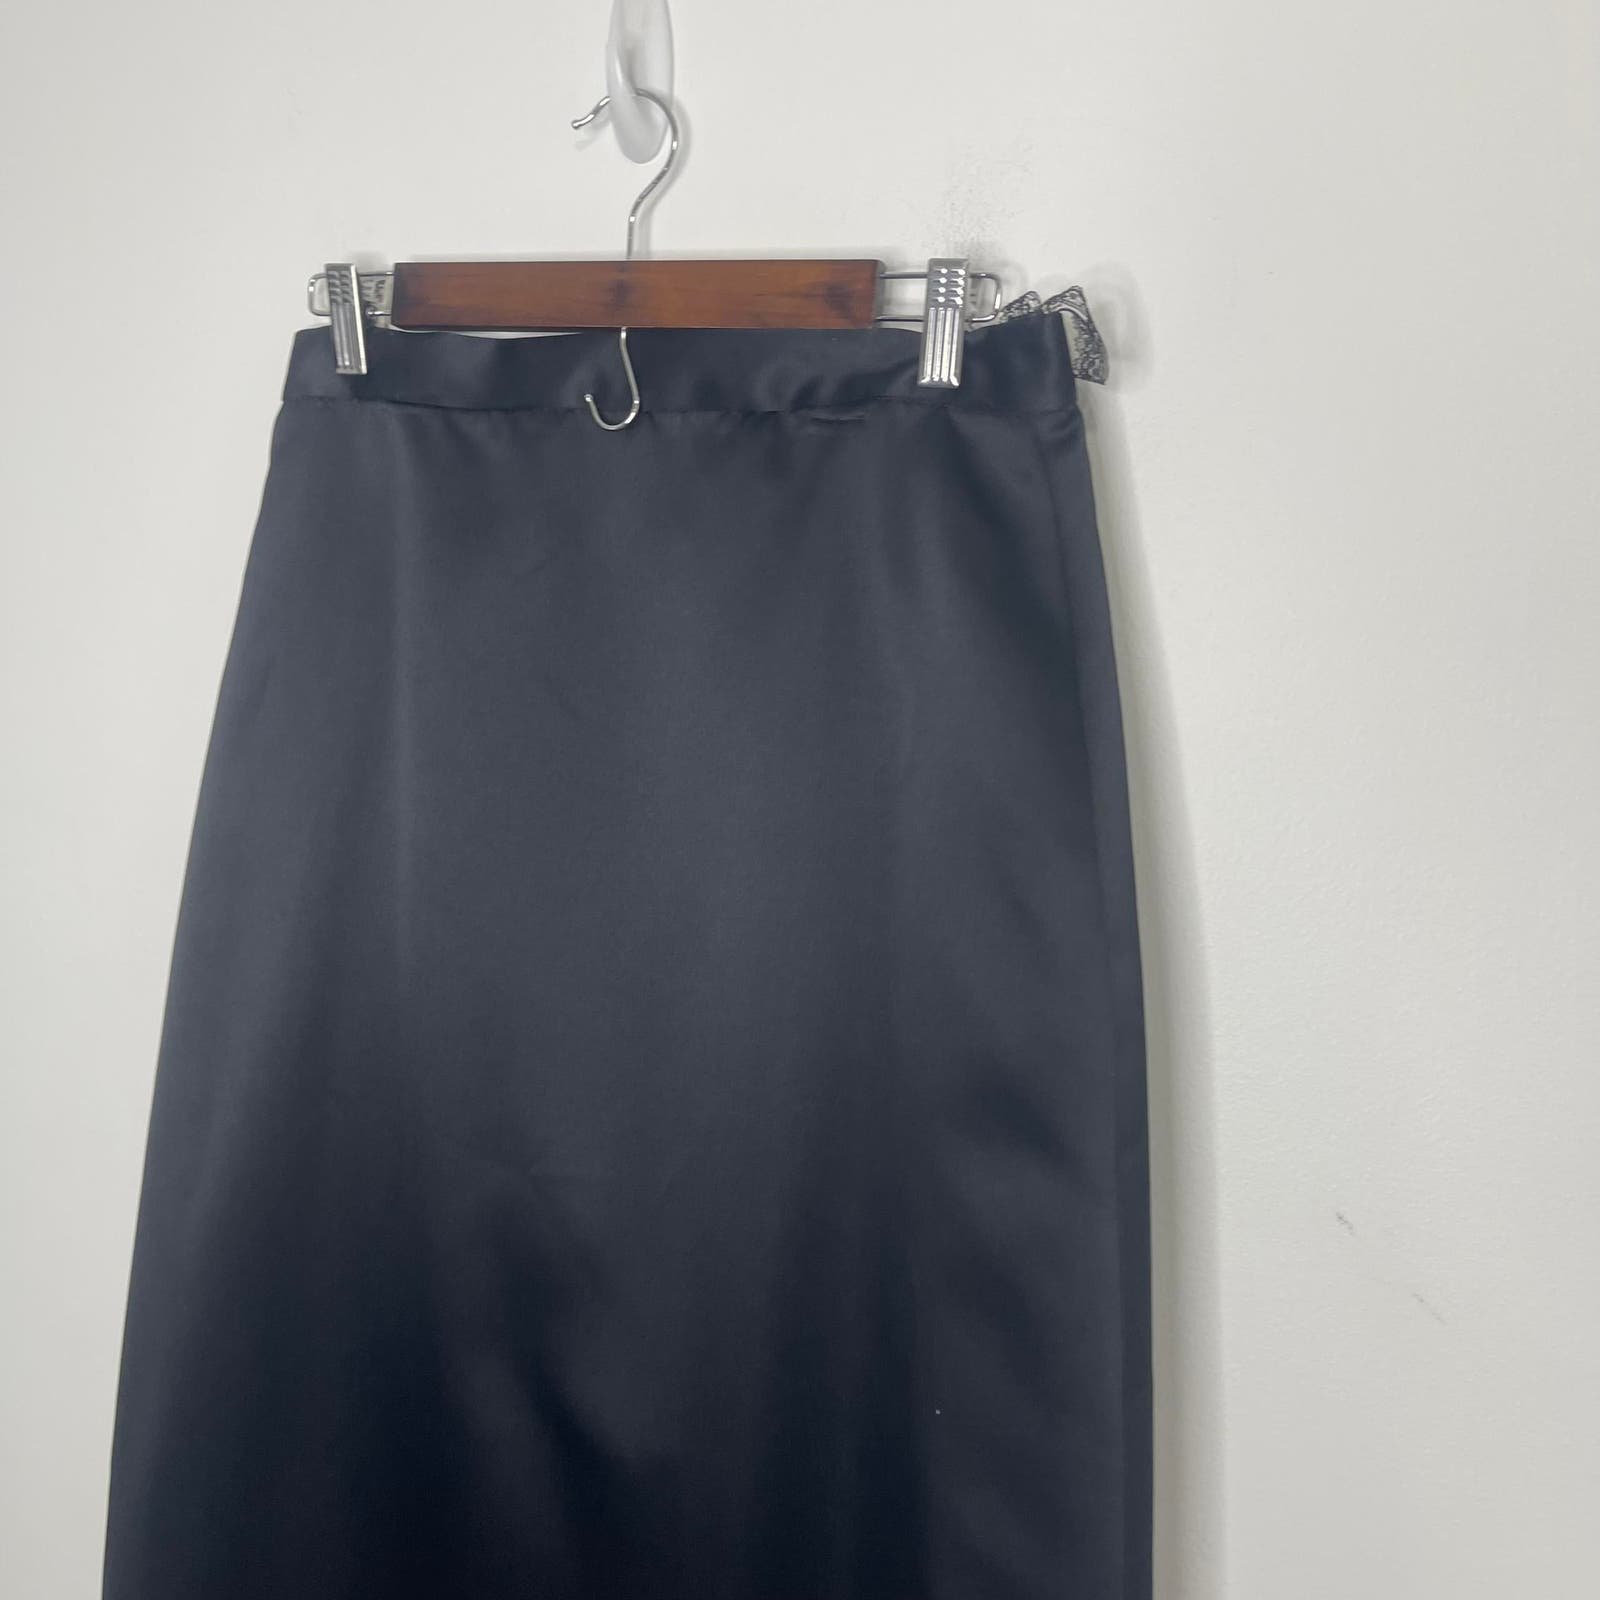 Personality J. R. Nites by Caliendo black long skirt size 12 for women satin formal unlined M0kHMgRJ2 Online Exclusive